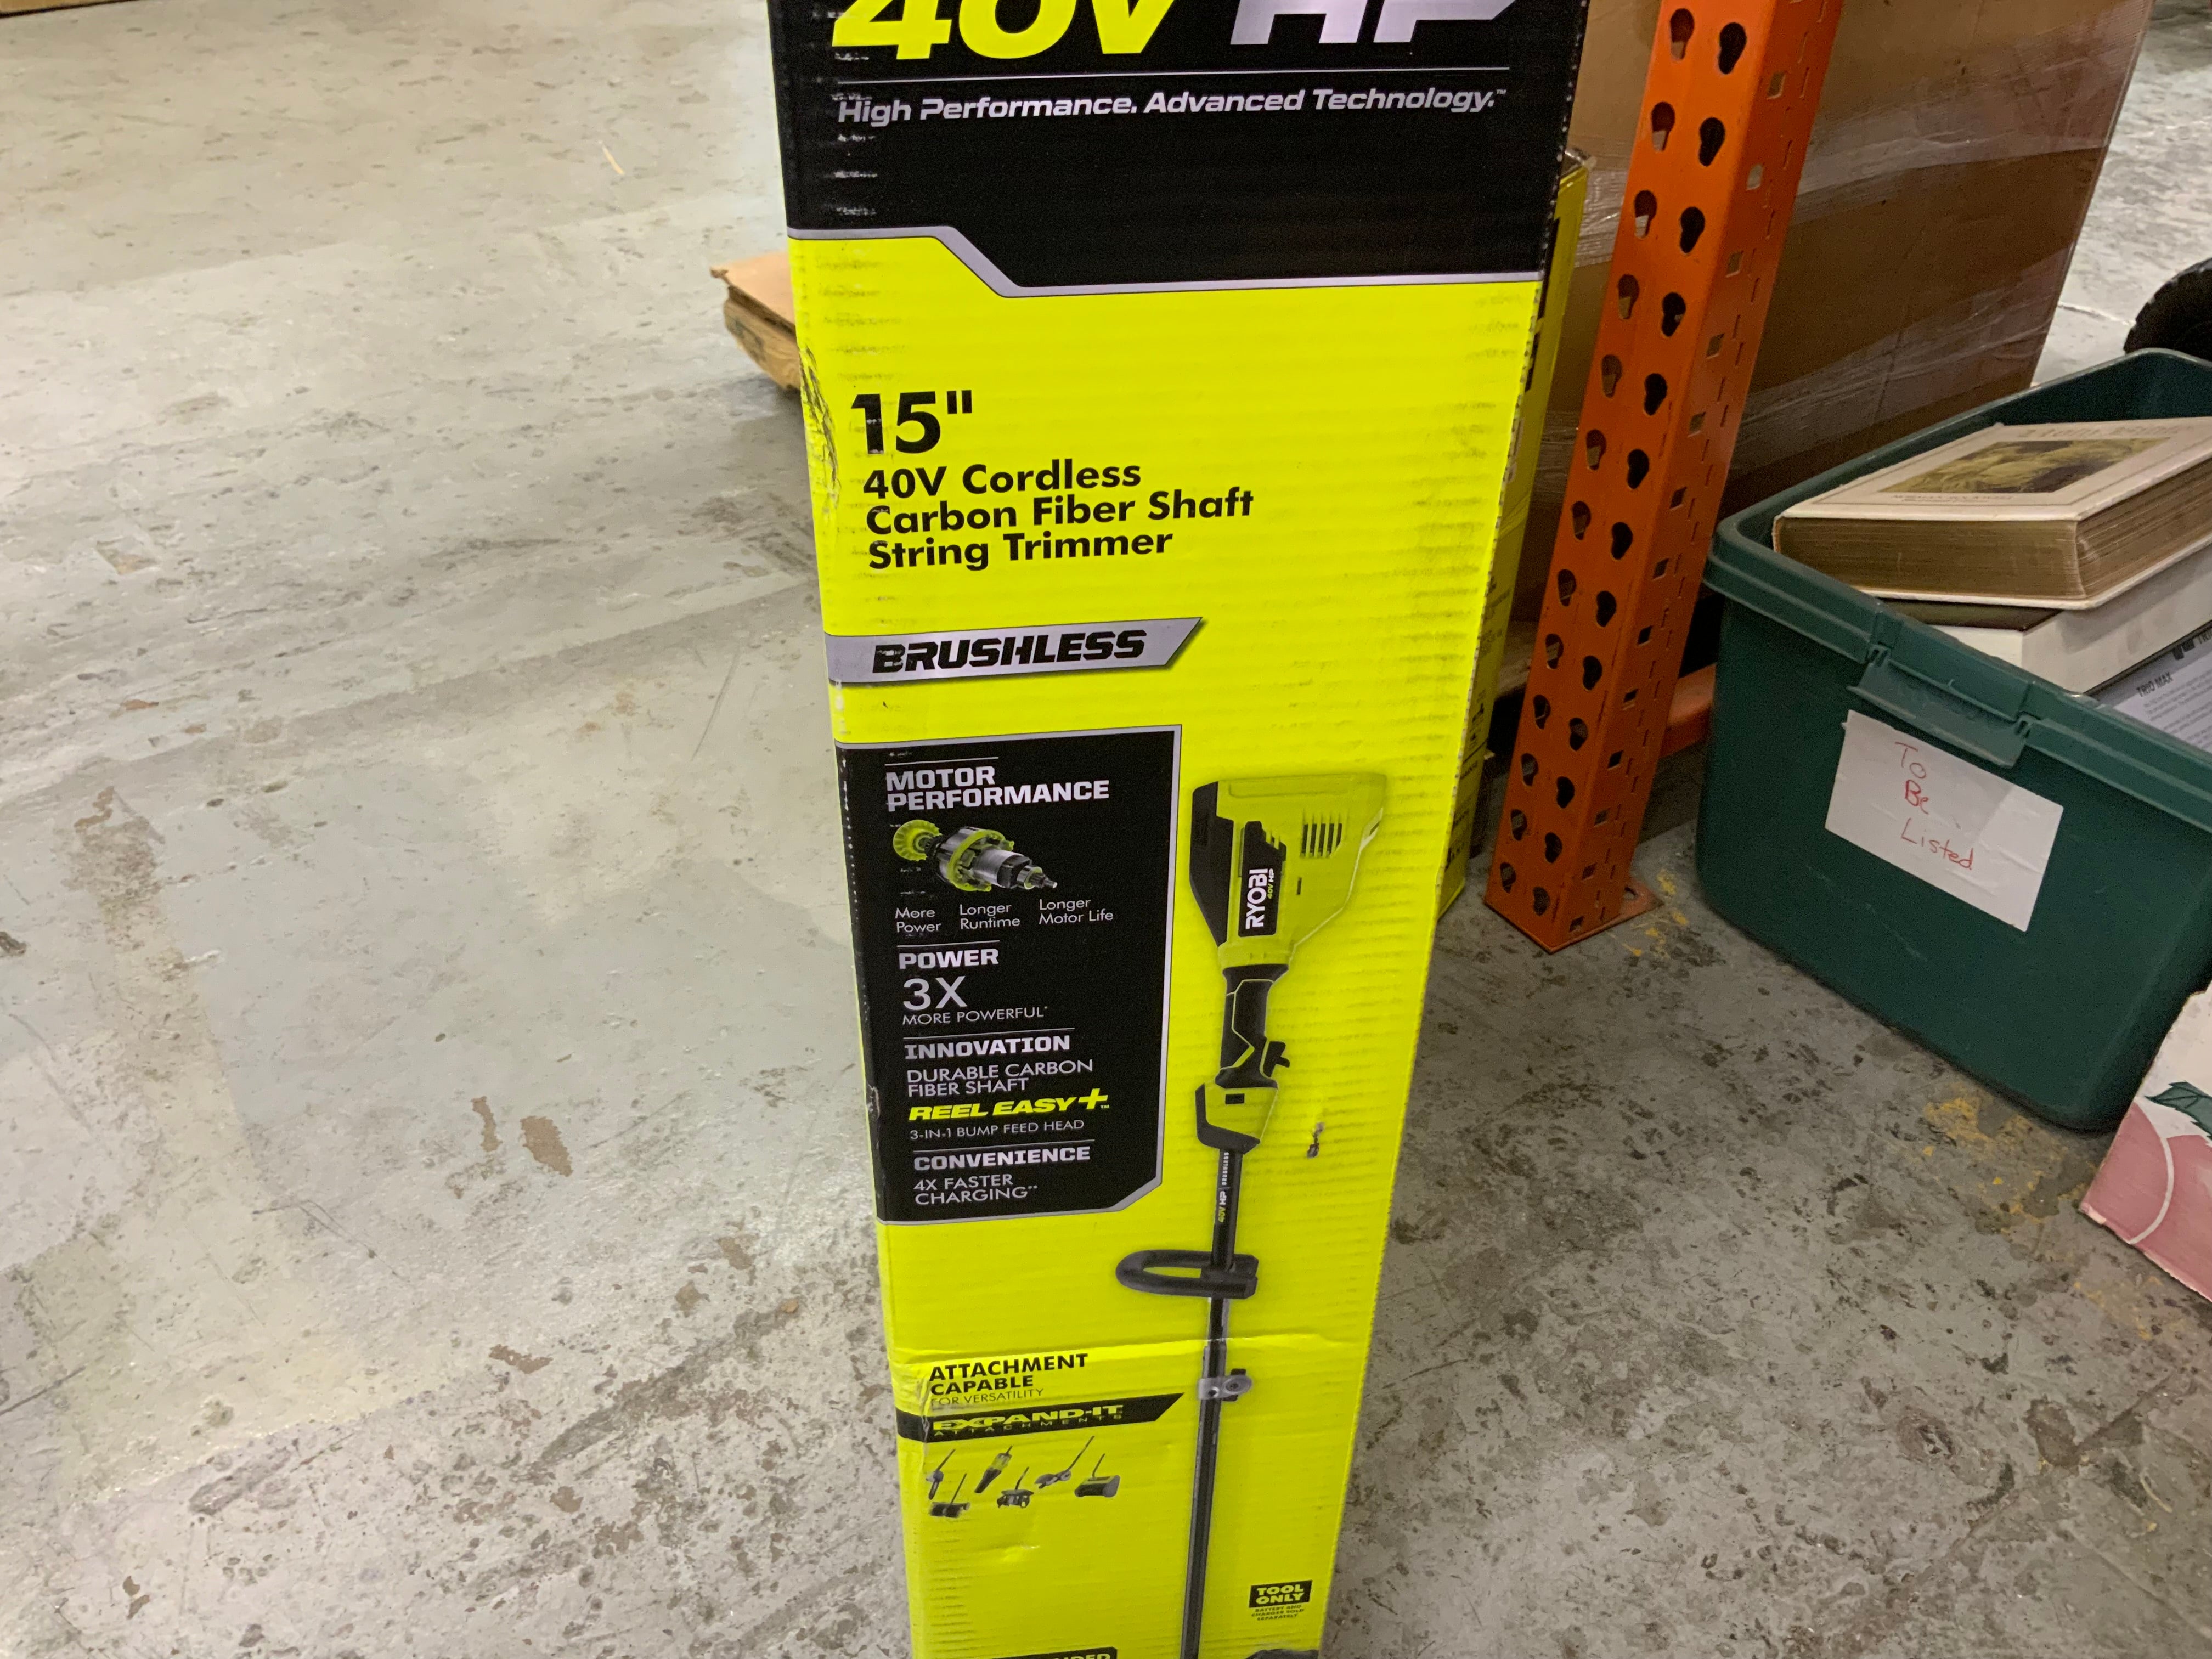 RYOBI 40V HP 15 in. Cordless Attachment Capable String Trimmer **TOOL ONLY** (8135325778158)